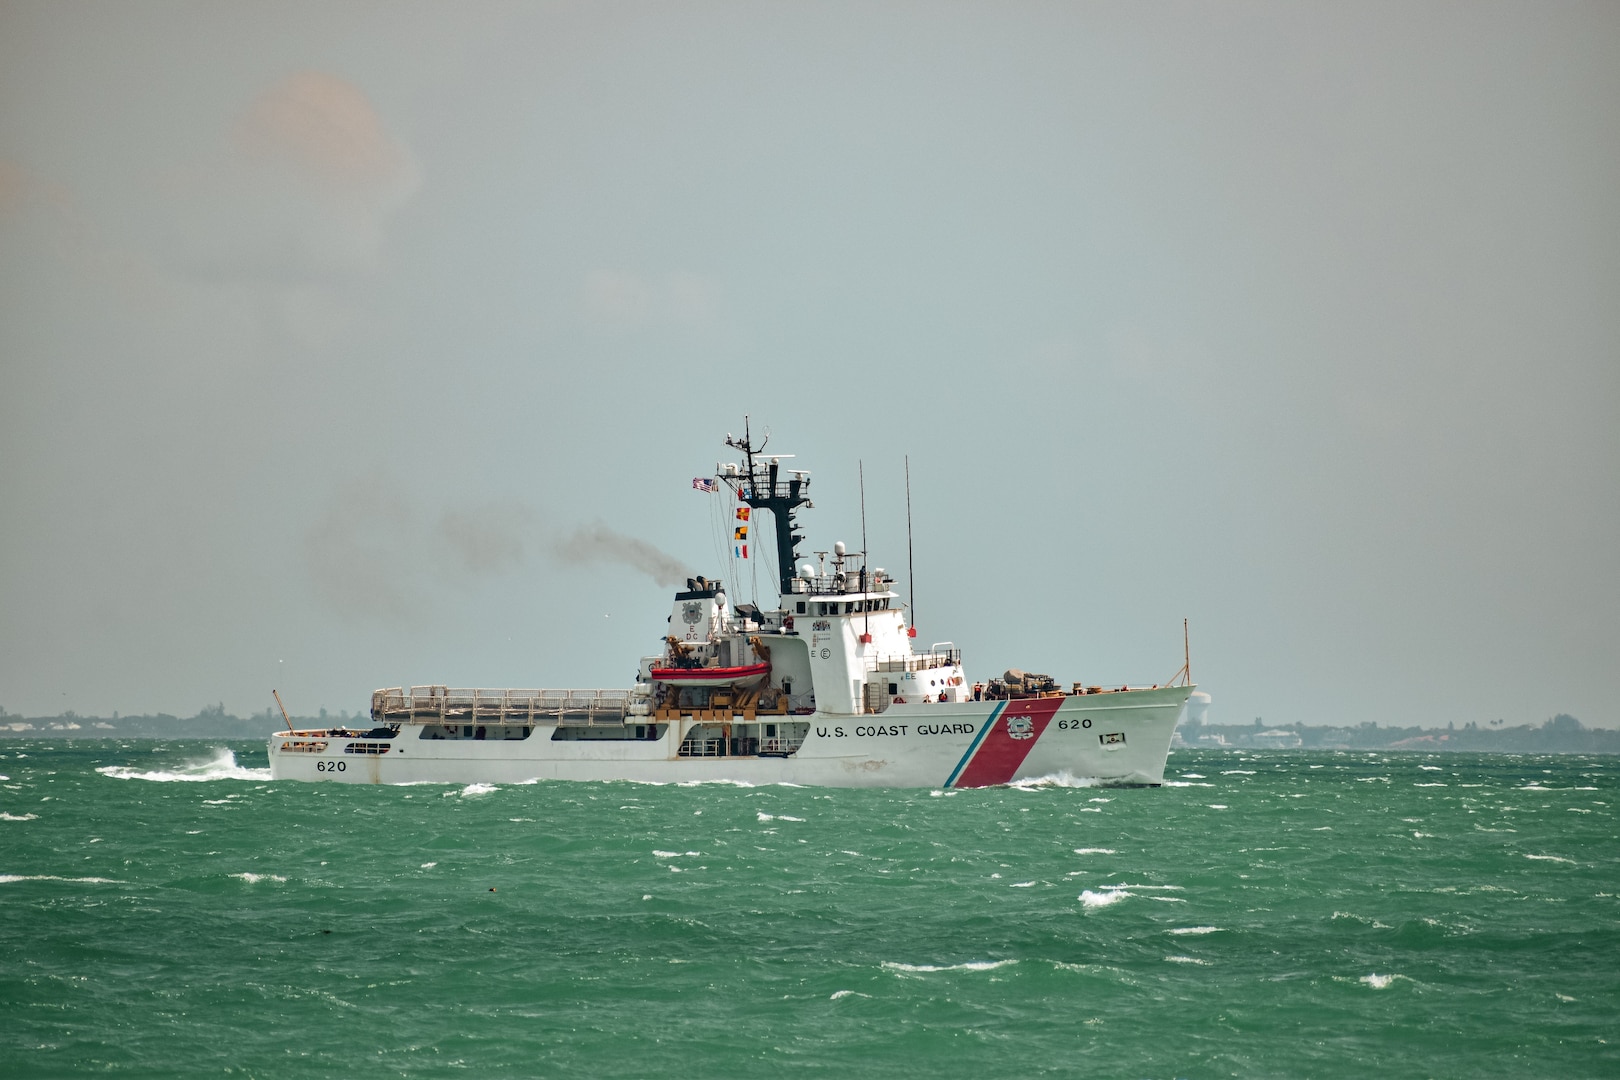 U.S. Coast Guard Cutter Resolute (WMEC 620) transits outbound for sea from homeport, St. Petersburg, Florida, ahead of a migrant interdiction and maritime safety and security patrol in the Caribbean Sea, April 10, 2024. Resolute routinely performs deterrence of illegal maritime migration throughout the Windward Passage, prioritizing the safety of life at sea and protecting the Nation’s southern maritime border. (U.S. Coast Guard photo courtesy of Coast Guard Cutter Resolute)